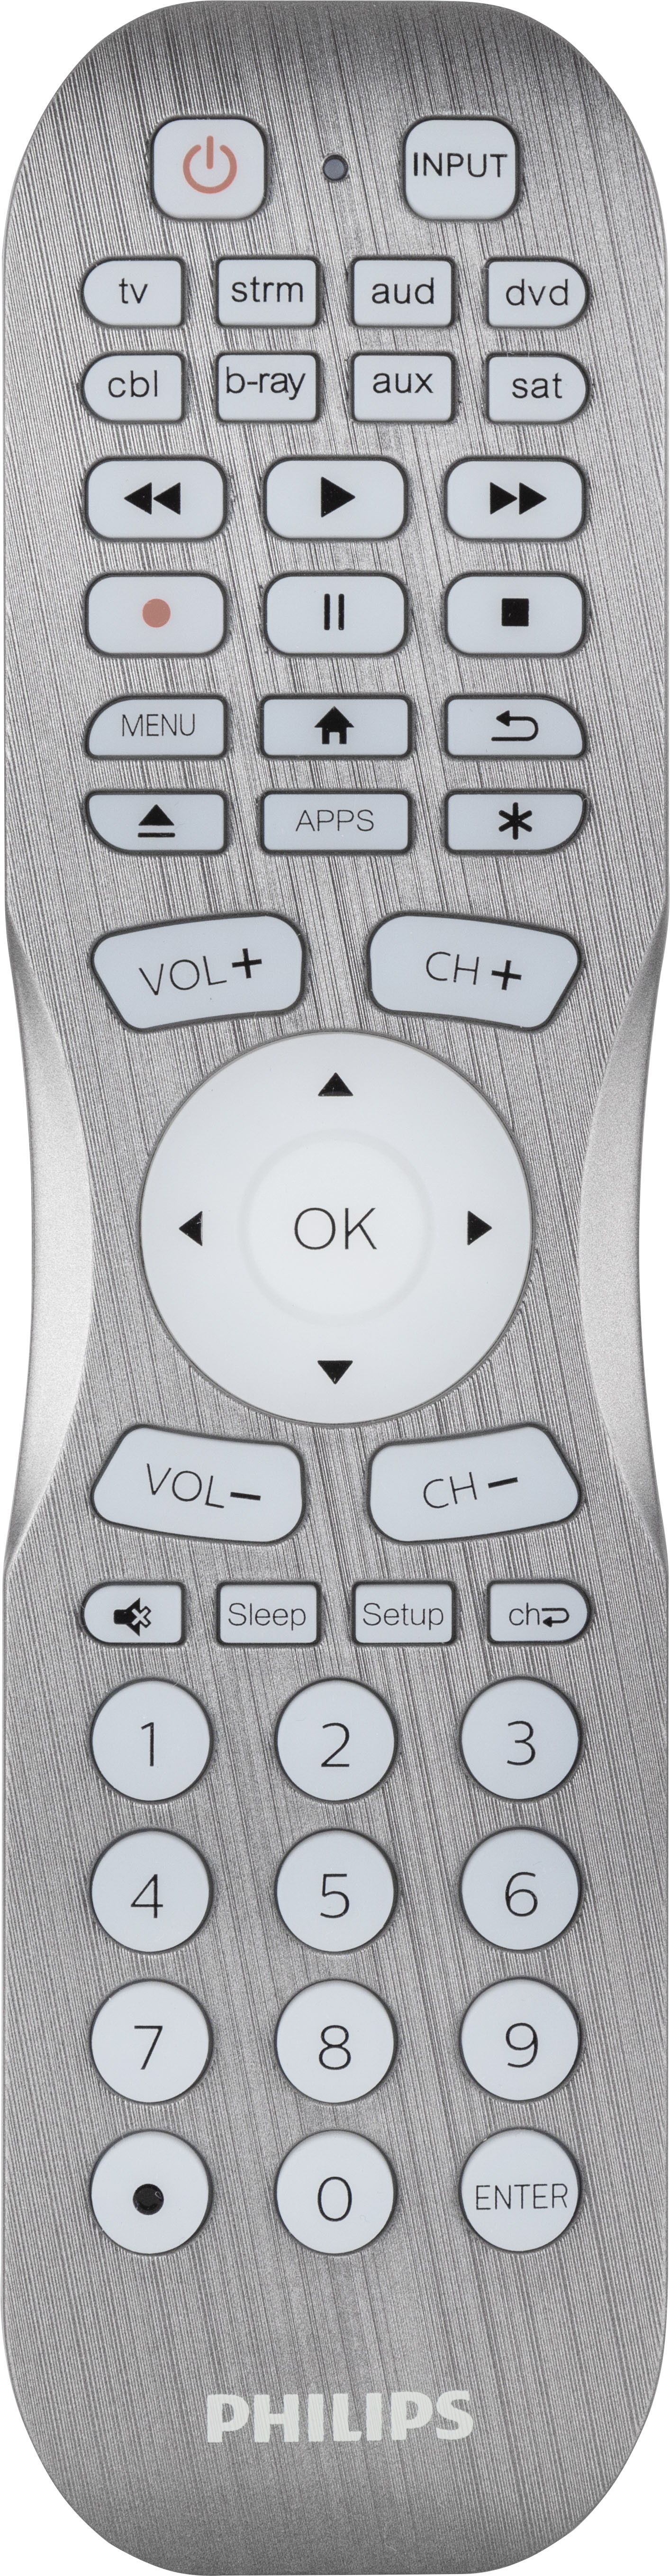 Philips 8 Device Backlit Remote Control Brushed Graphite - Best